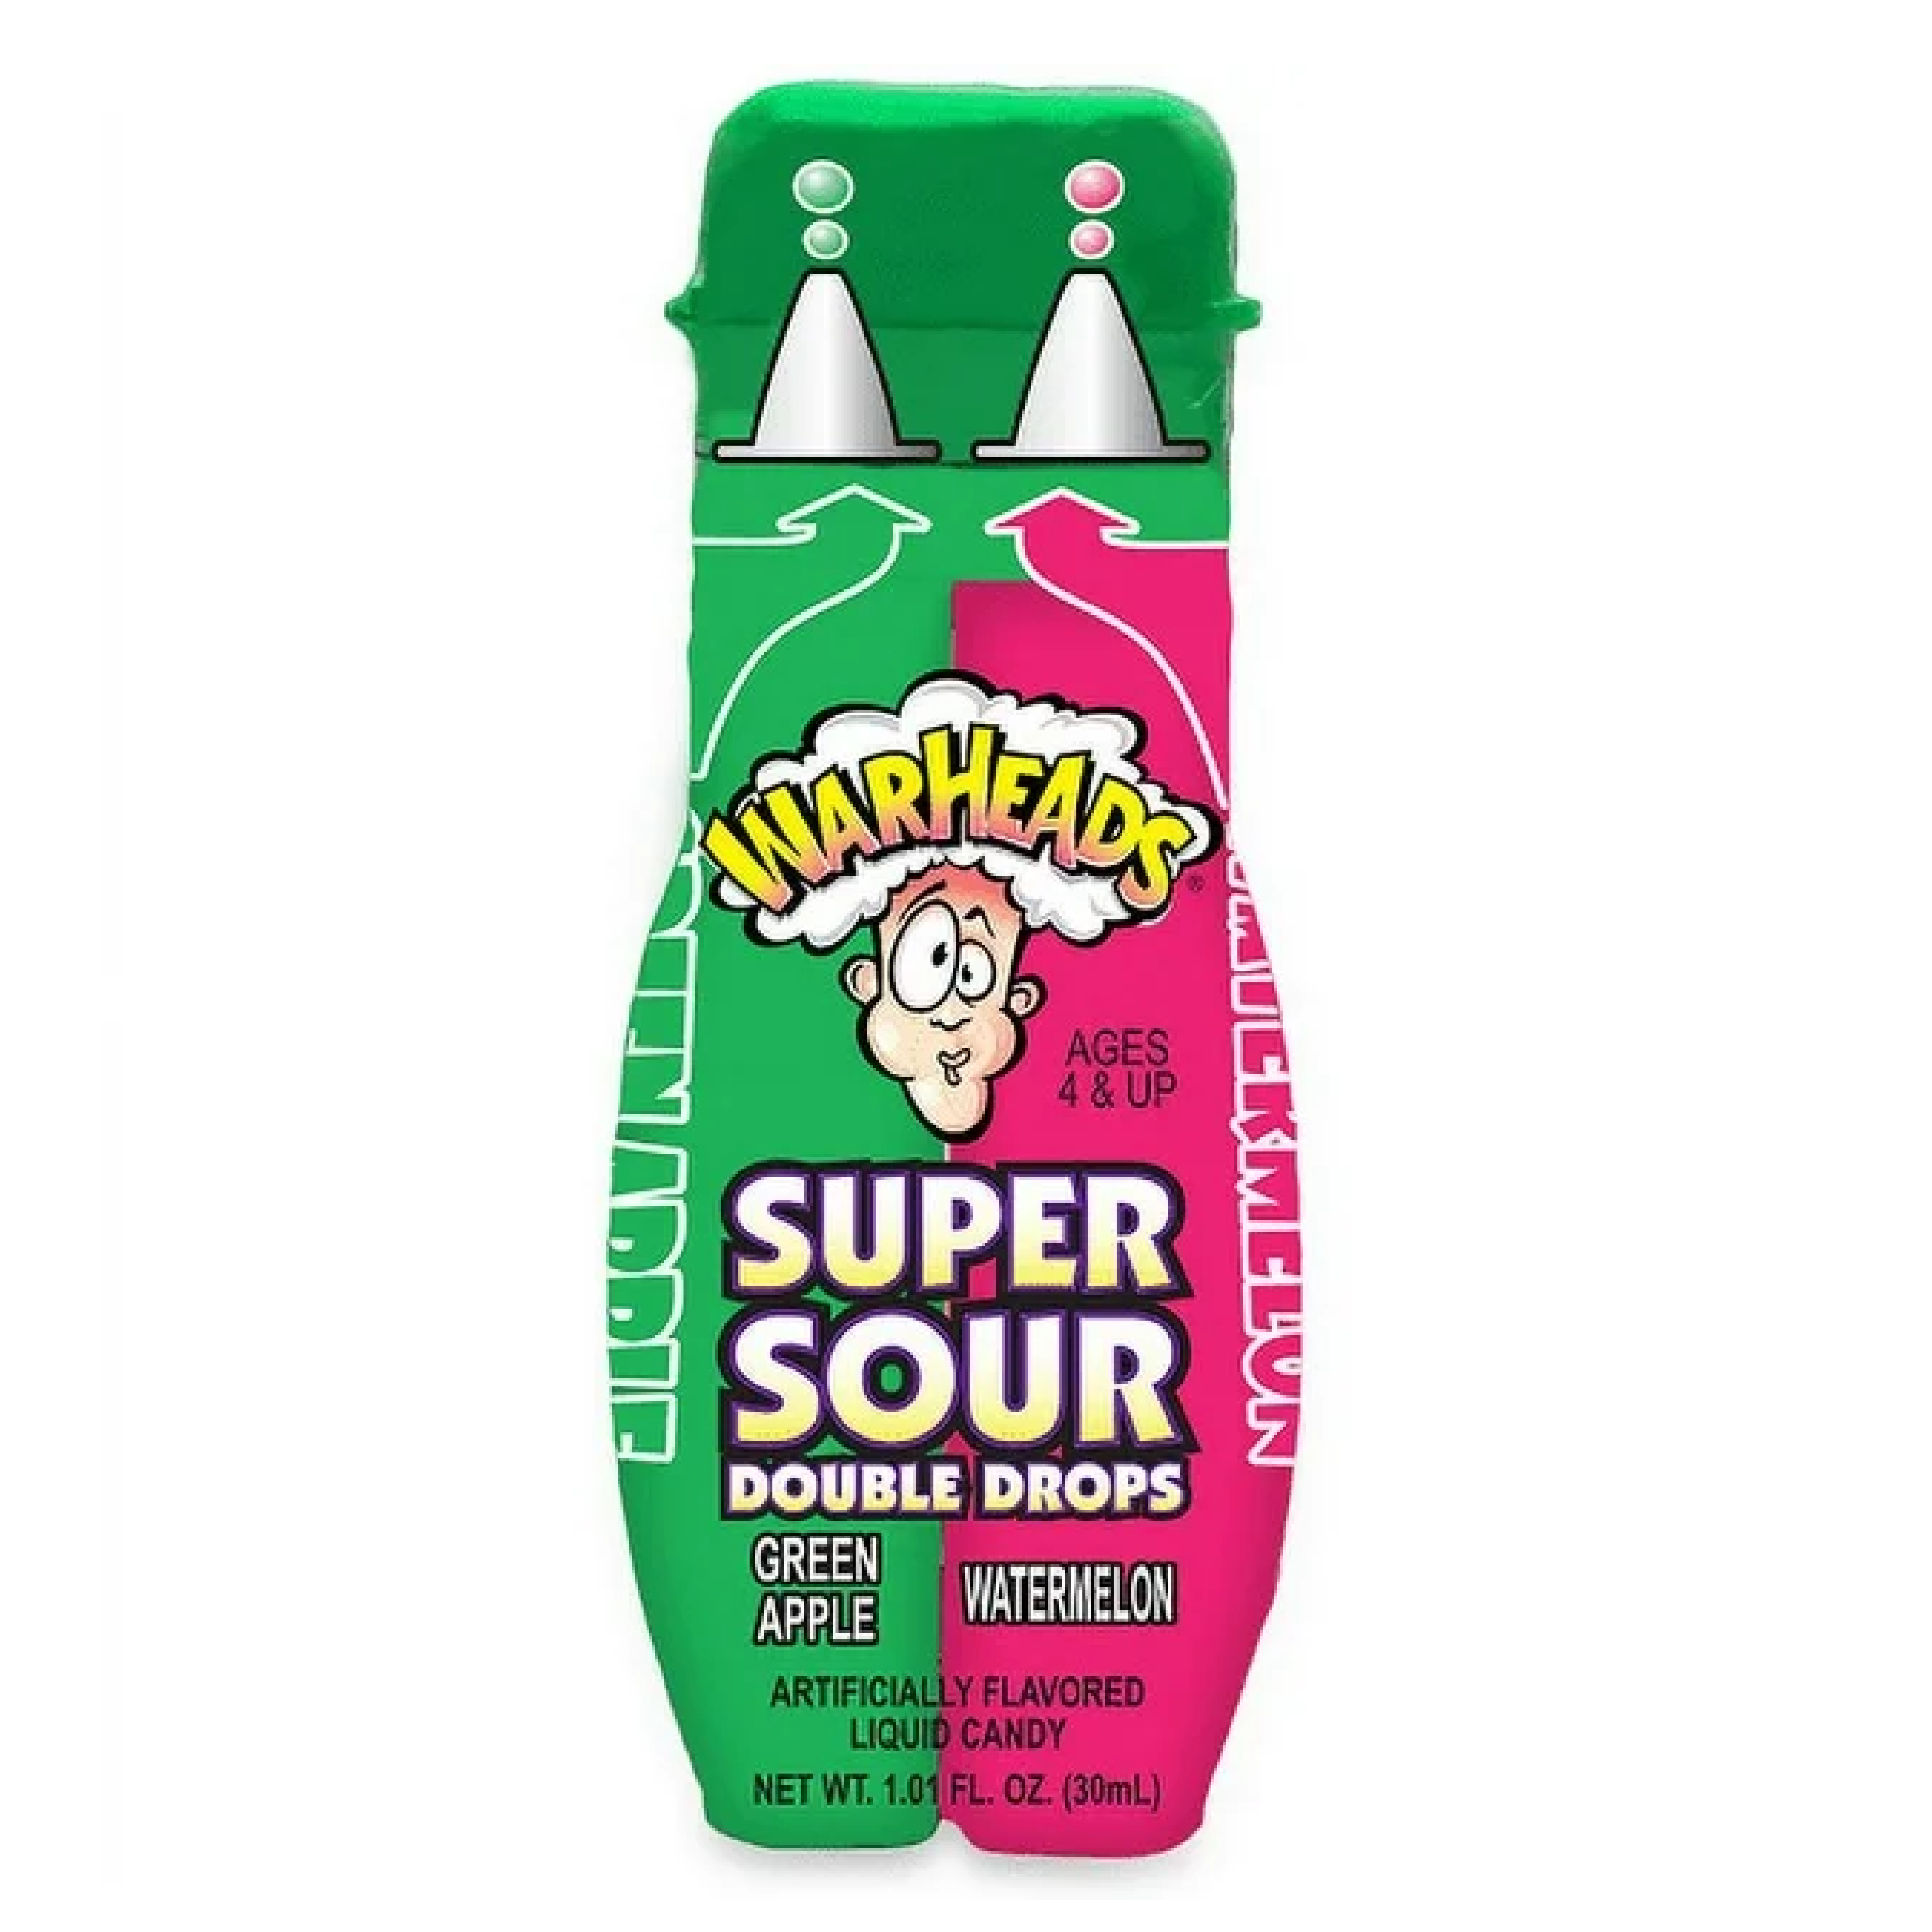 Warheads Super Sour Assorted Flavor Double Drops 30ml